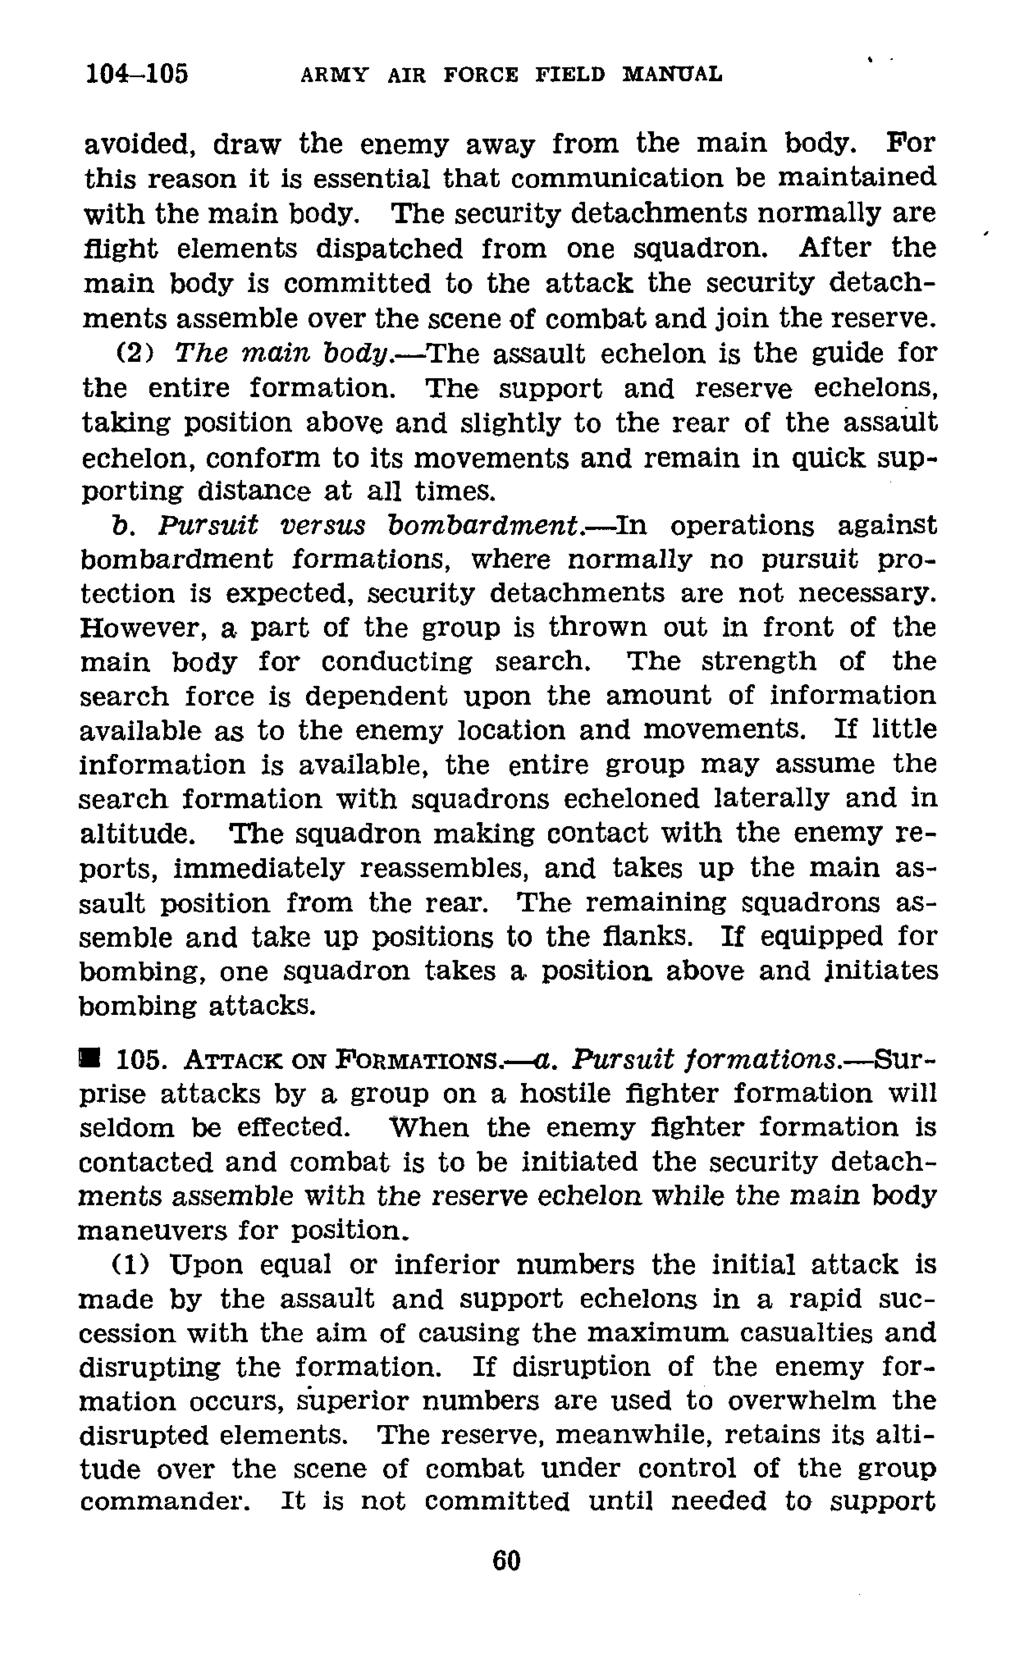 104-105 ARMY AIR FORCE FIELD MANUAL avoided, draw the enemy away from the main body. For this reason it is essential that communication be maintained with the main body.